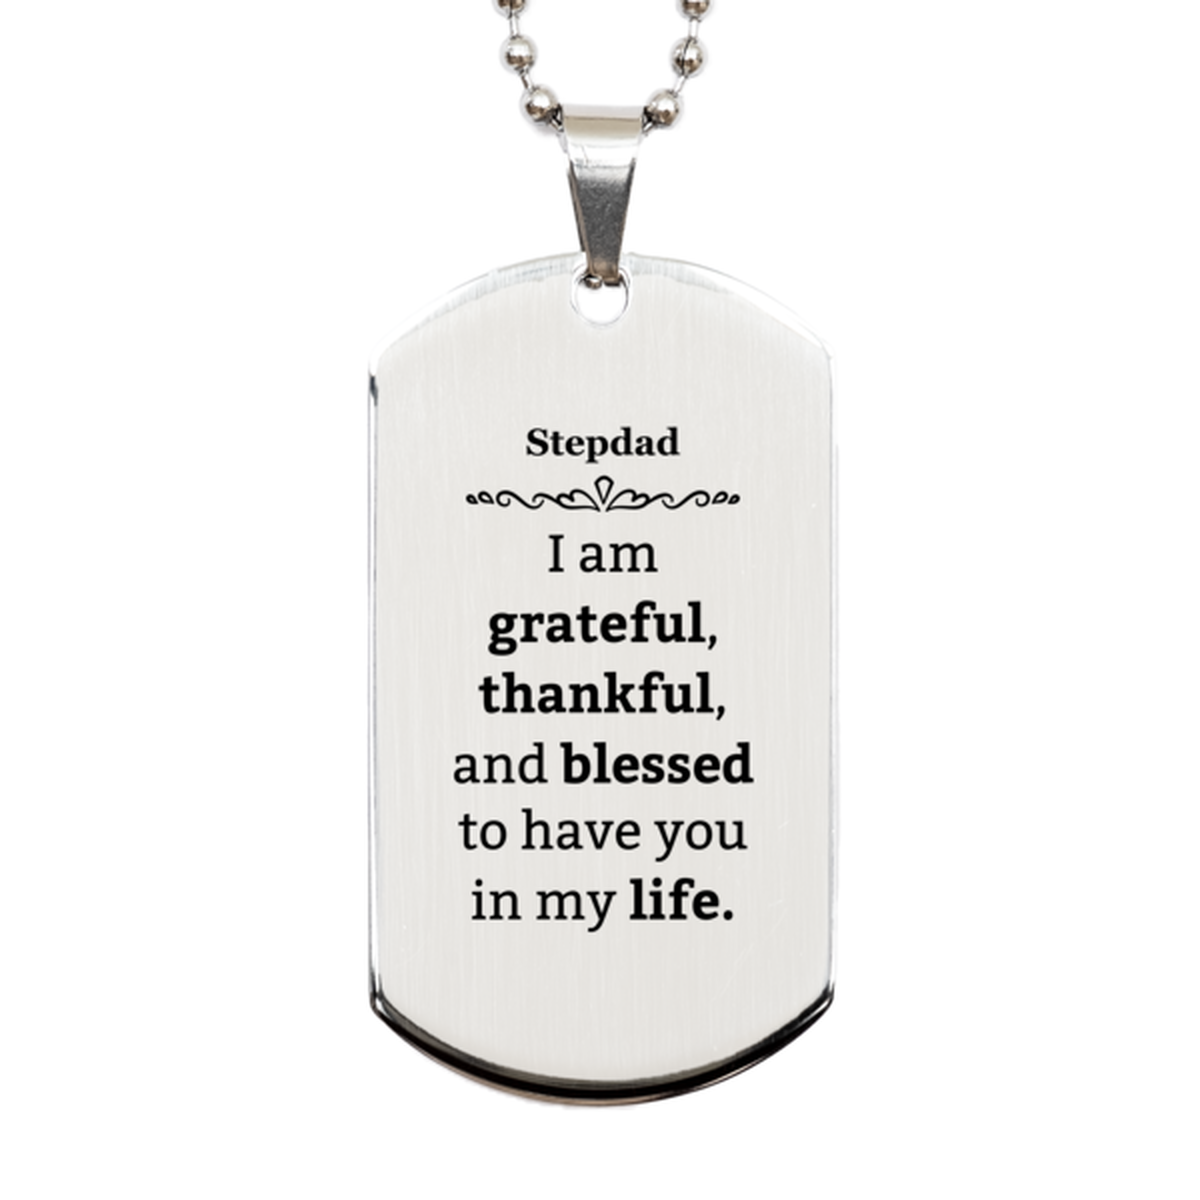 Stepdad Appreciation Gifts, I am grateful, thankful, and blessed, Thank You Silver Dog Tag for Stepdad, Birthday Inspiration Gifts for Stepdad